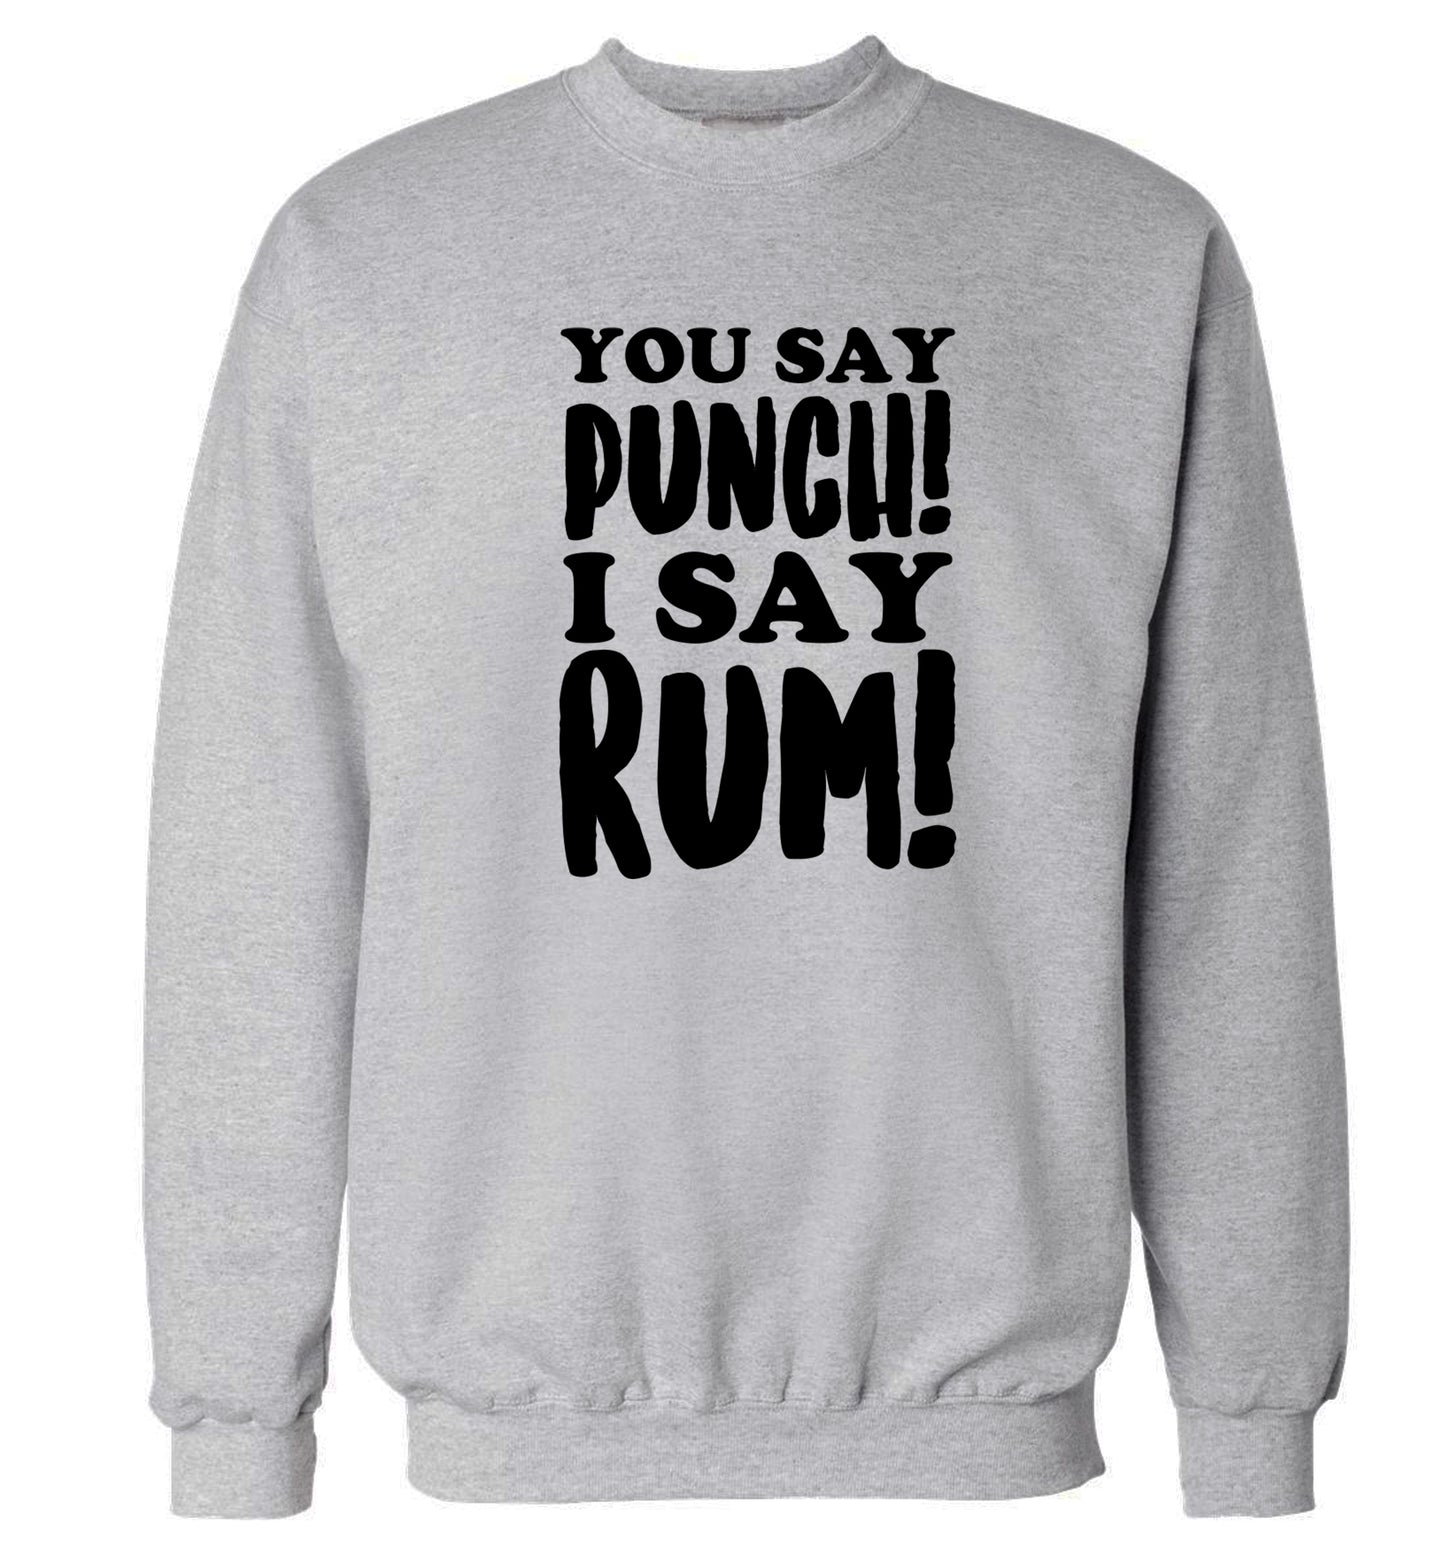 You say punch I say rum! Adult's unisex grey Sweater 2XL